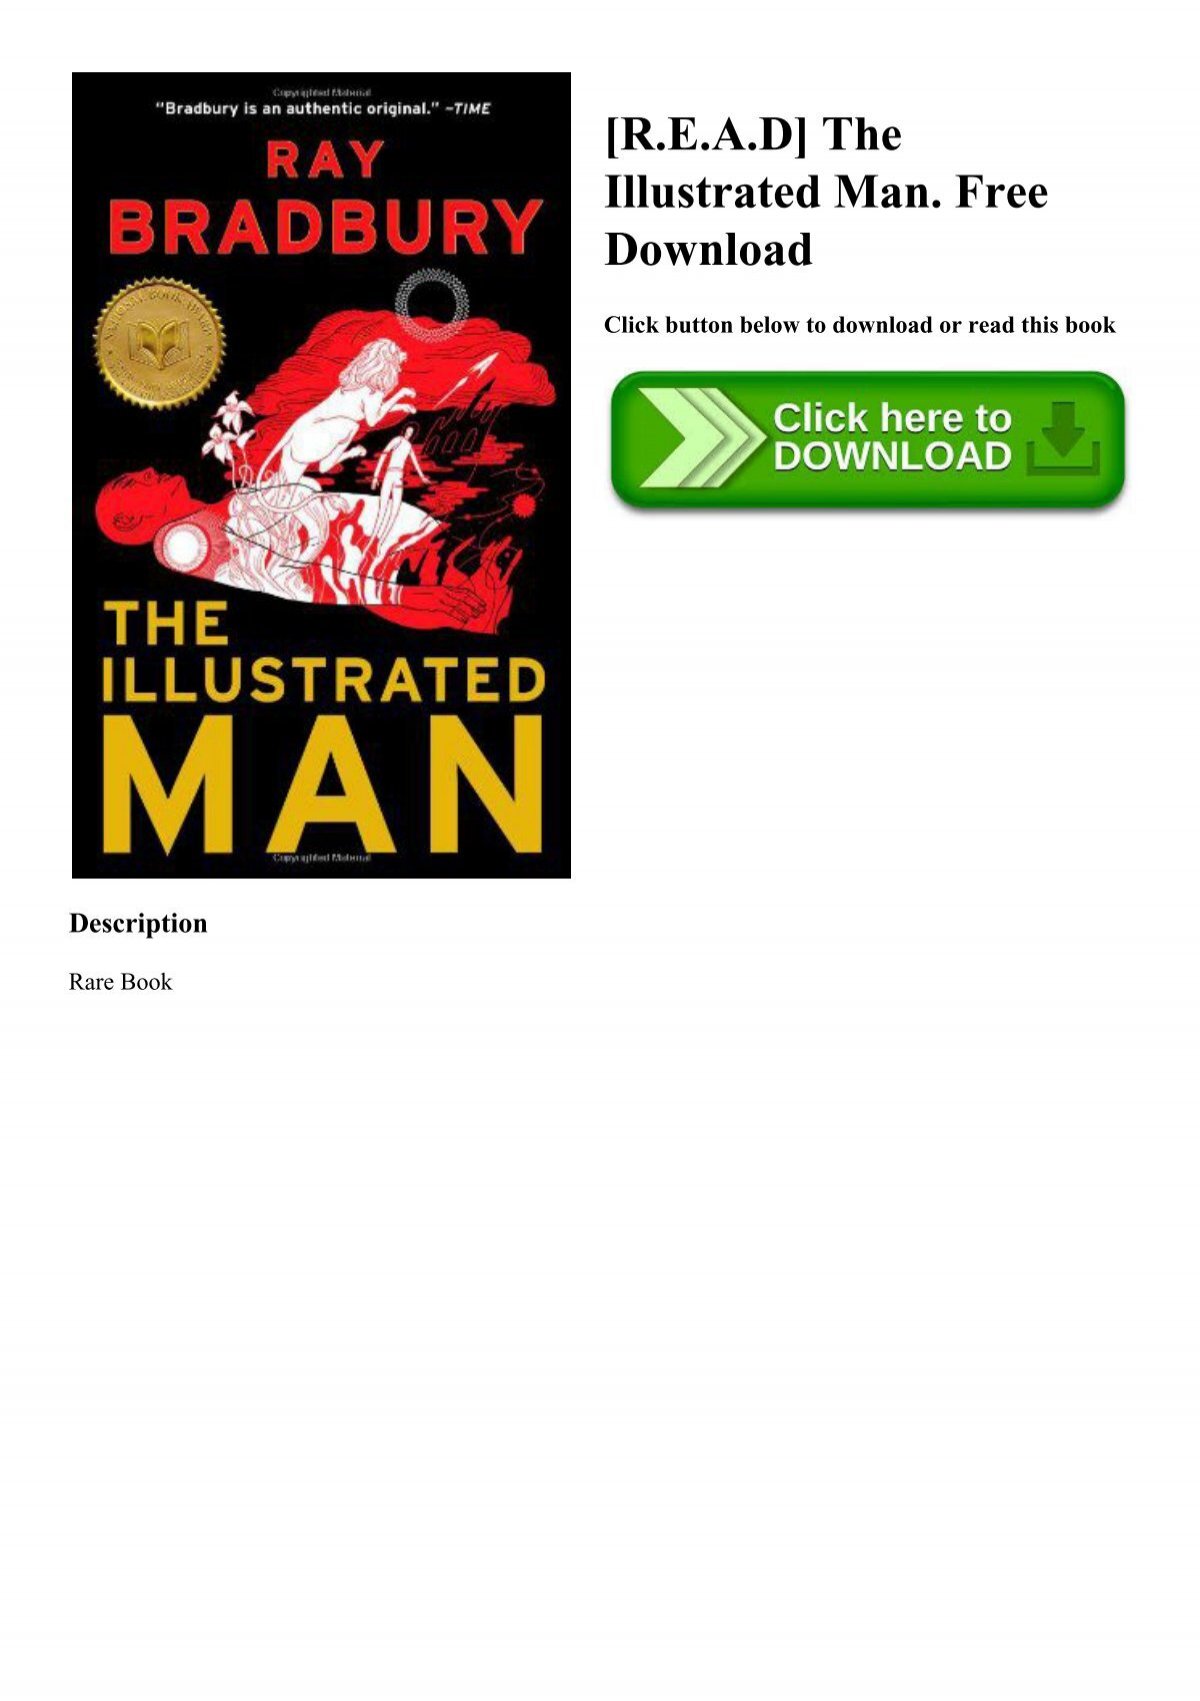 the illustrated man ebook free download